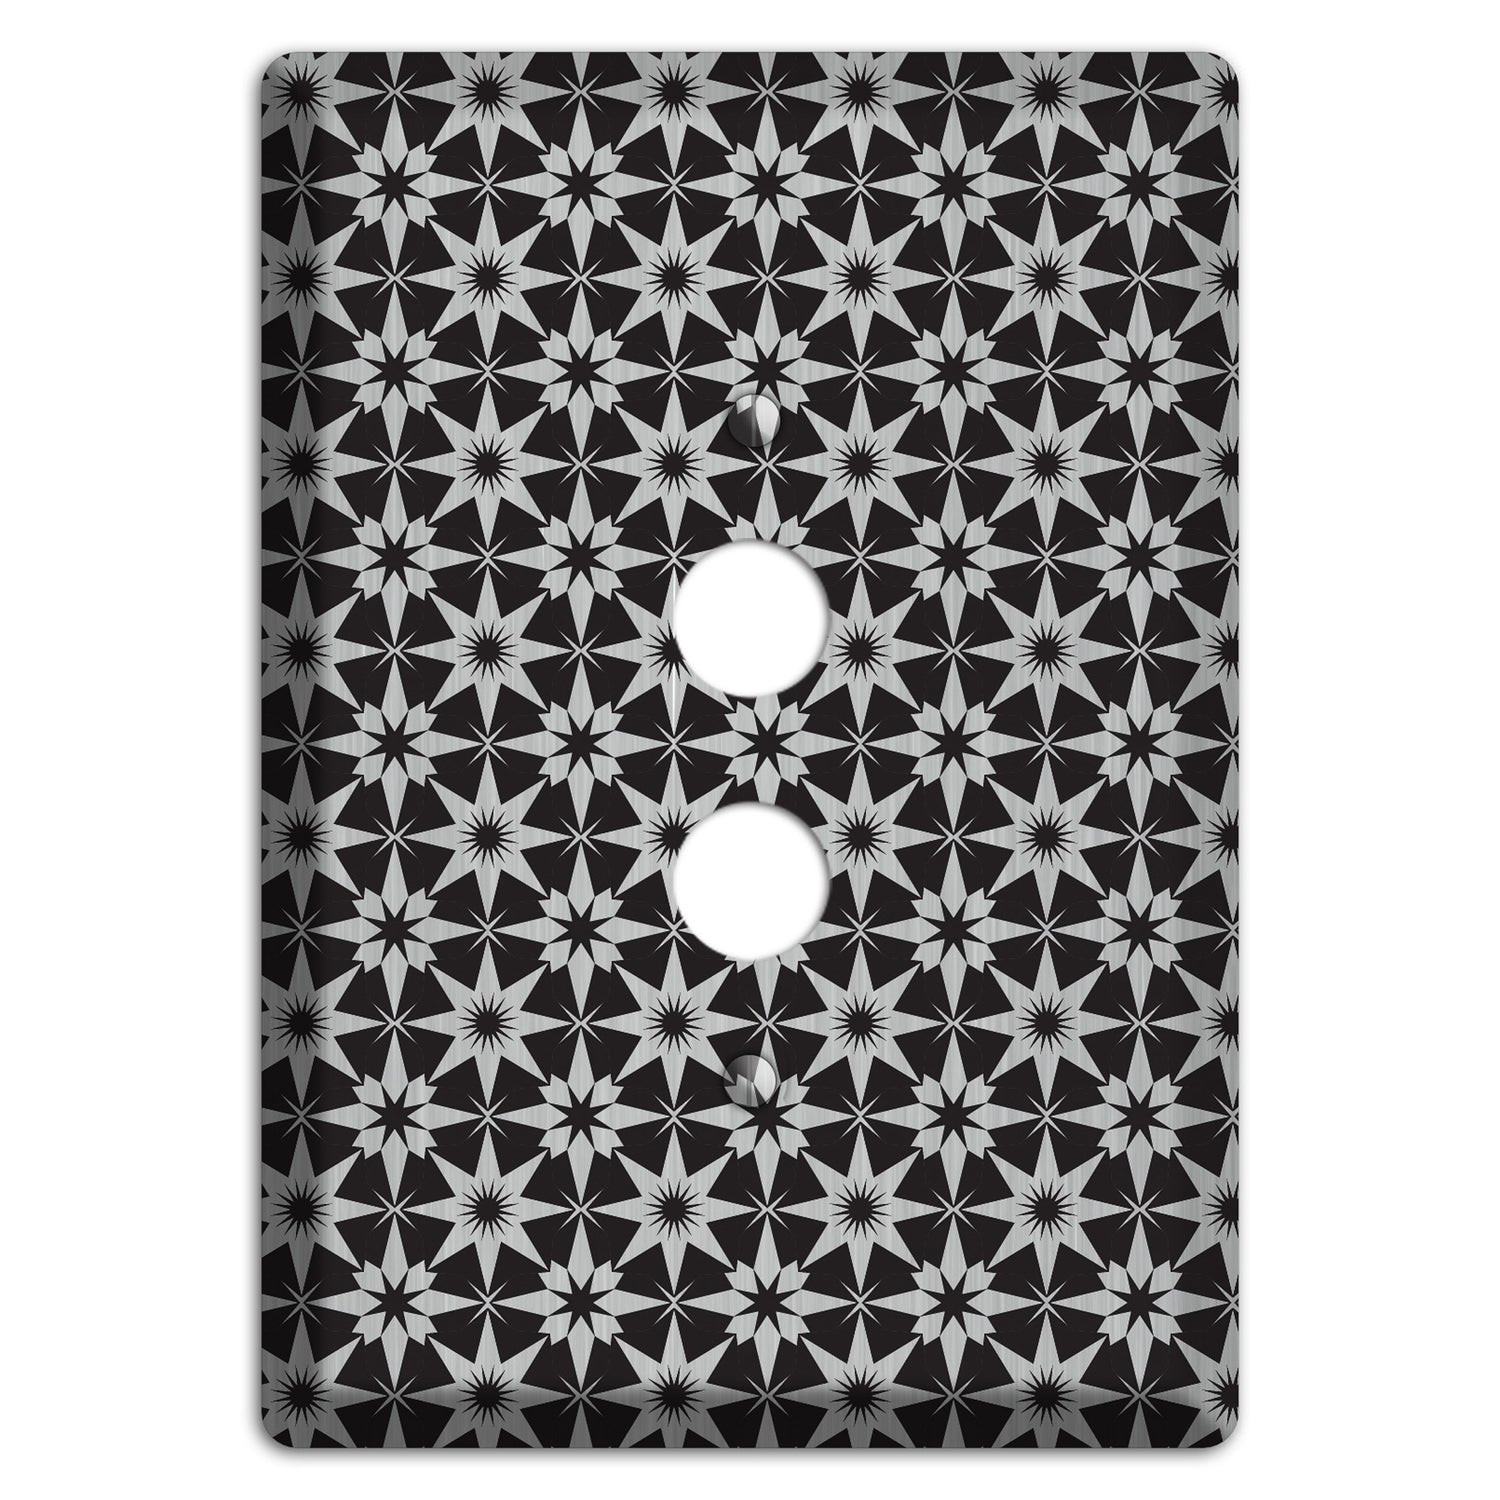 Black with Stainless Foulard 1 Pushbutton Wallplate